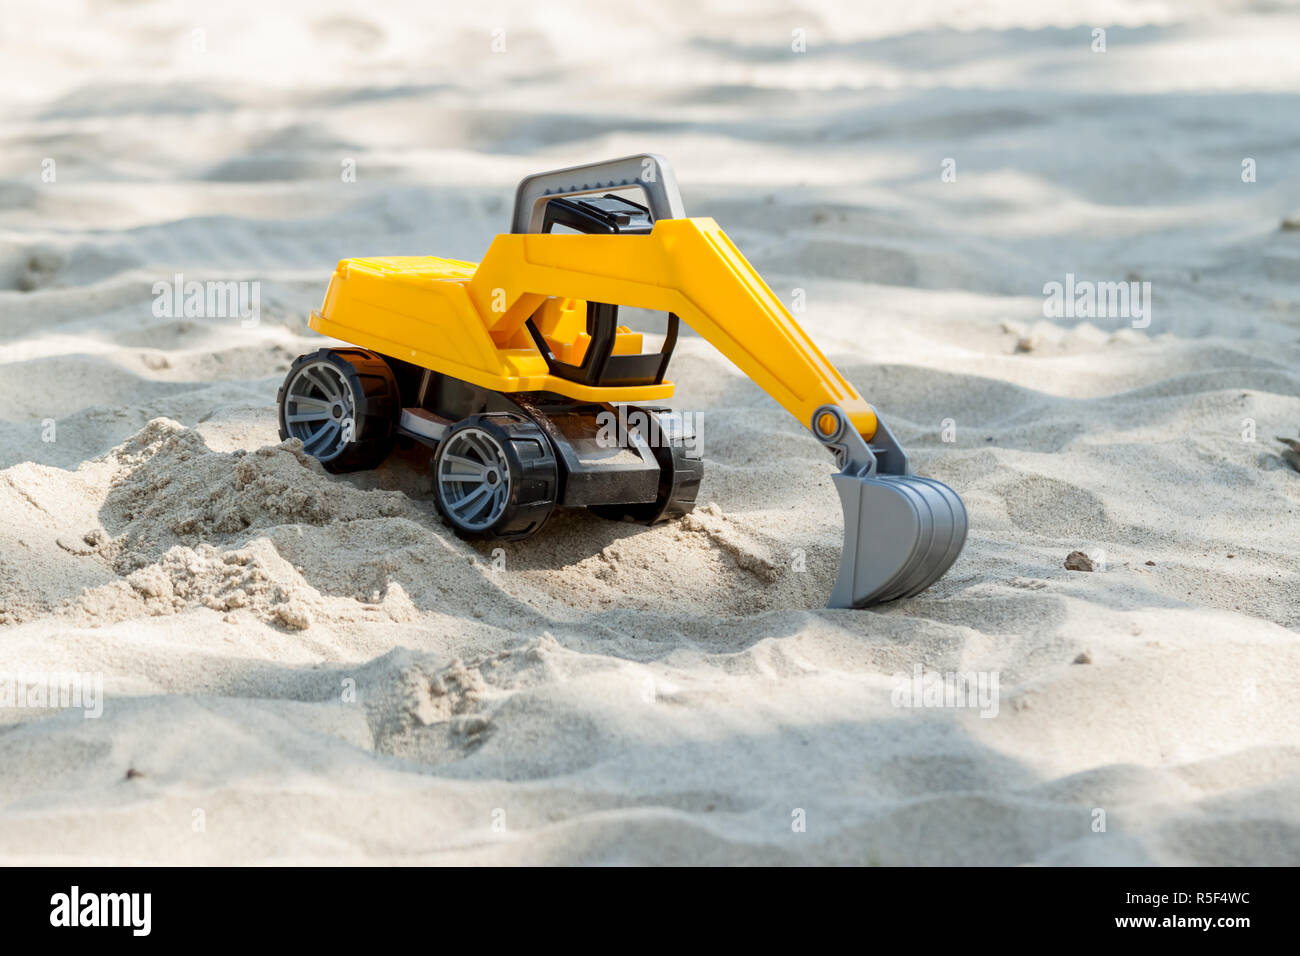 Toy Backhoe Sand Digger Beach Toy  BUILDING PLANS 